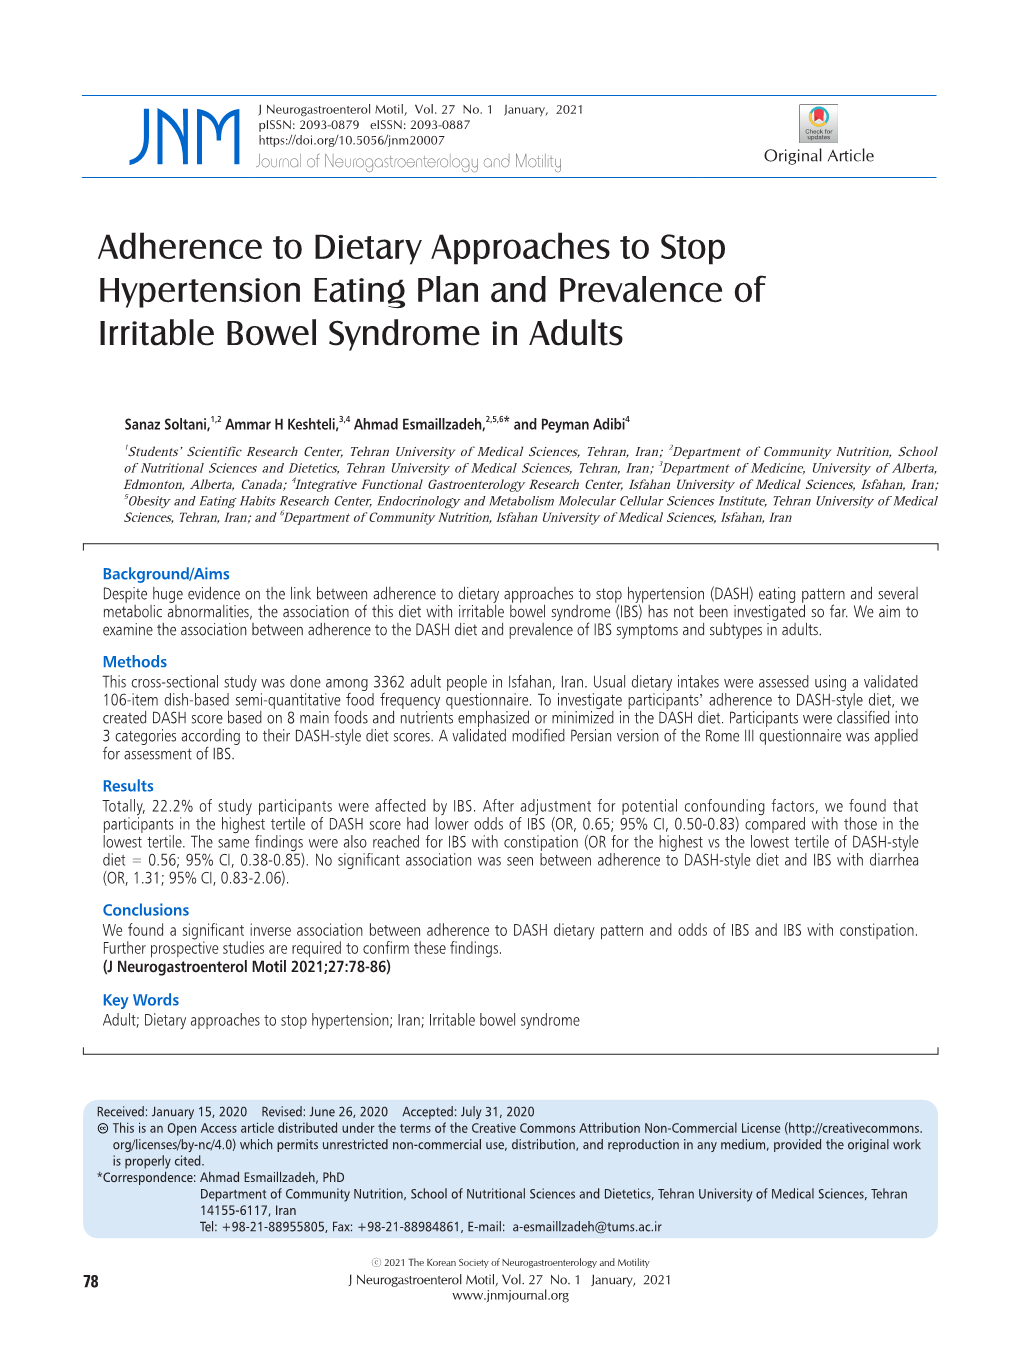 Adherence to Dietary Approaches to Stop Hypertension Eating Plan and Prevalence of Irritable Bowel Syndrome in Adults